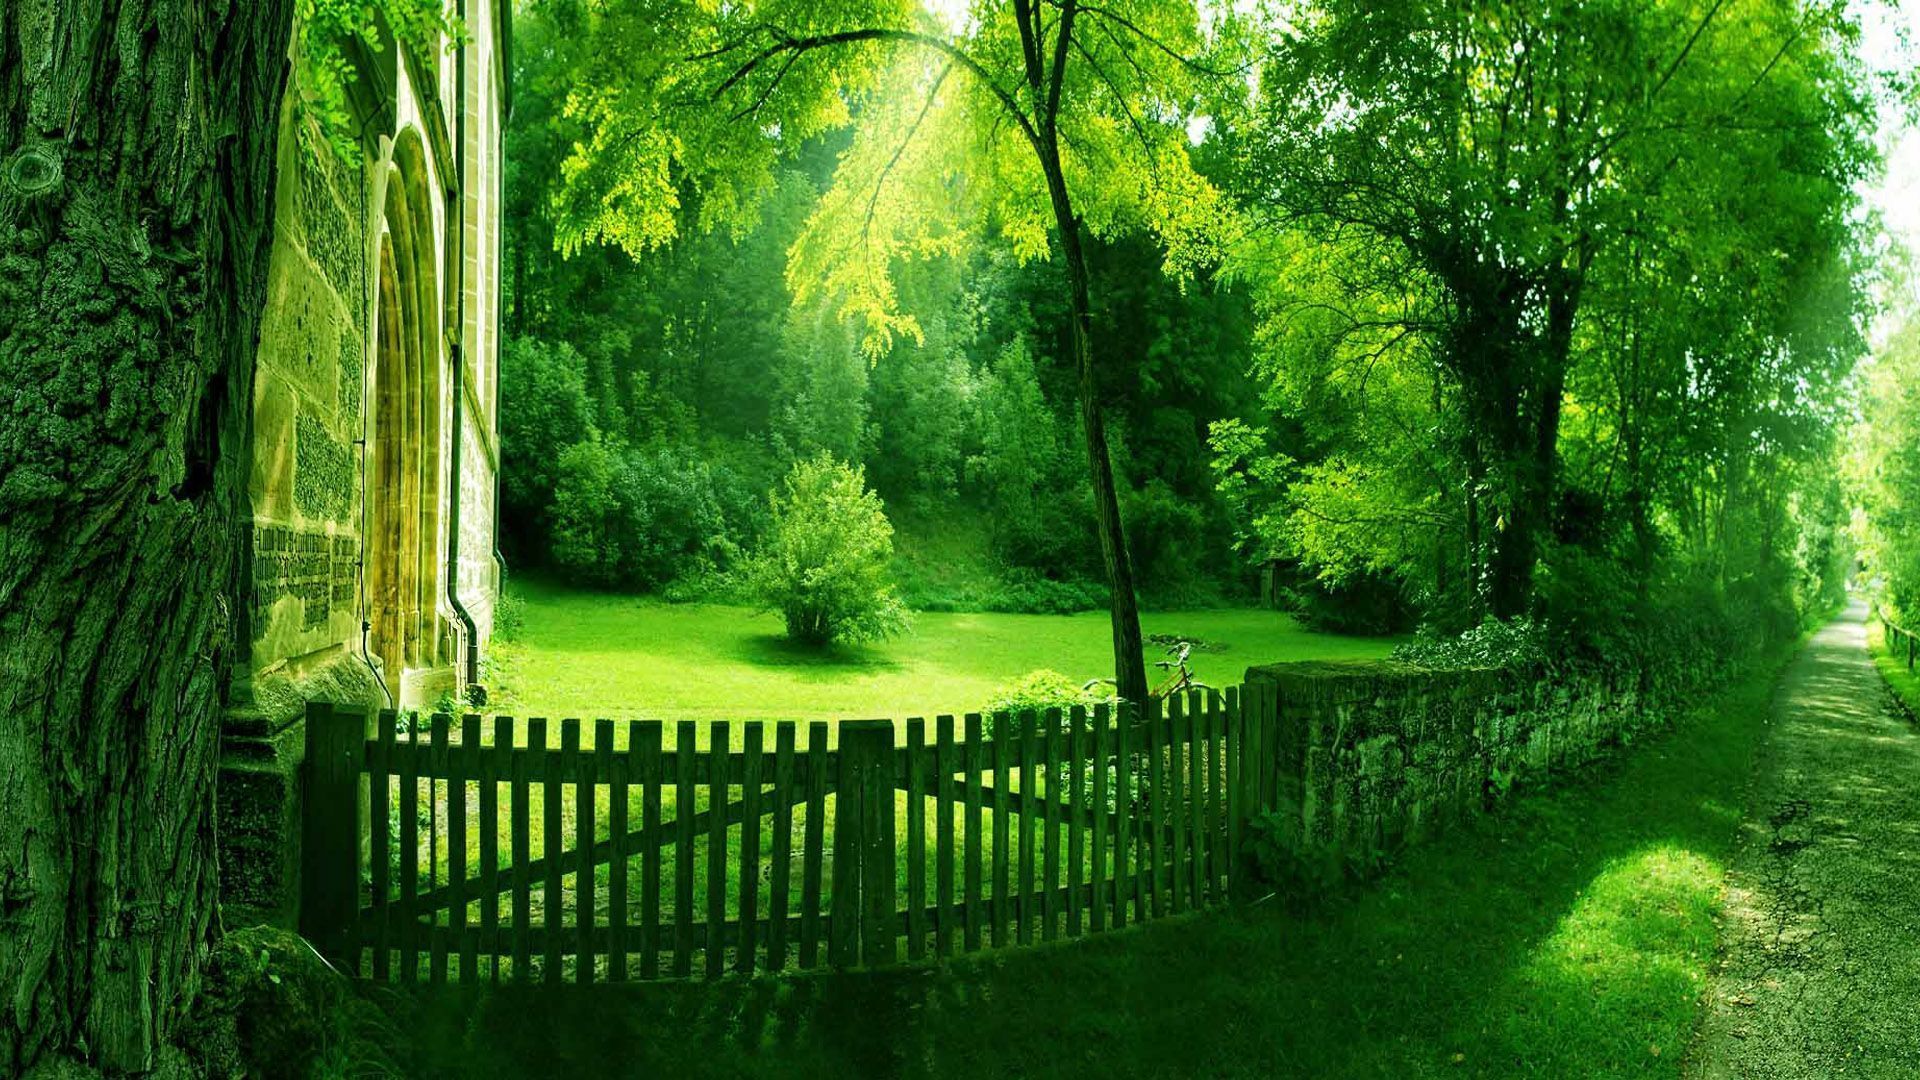 Green Scenery Grass Trees Plants Bushes Wood Fence HD Green Aesthetic Wallpaper